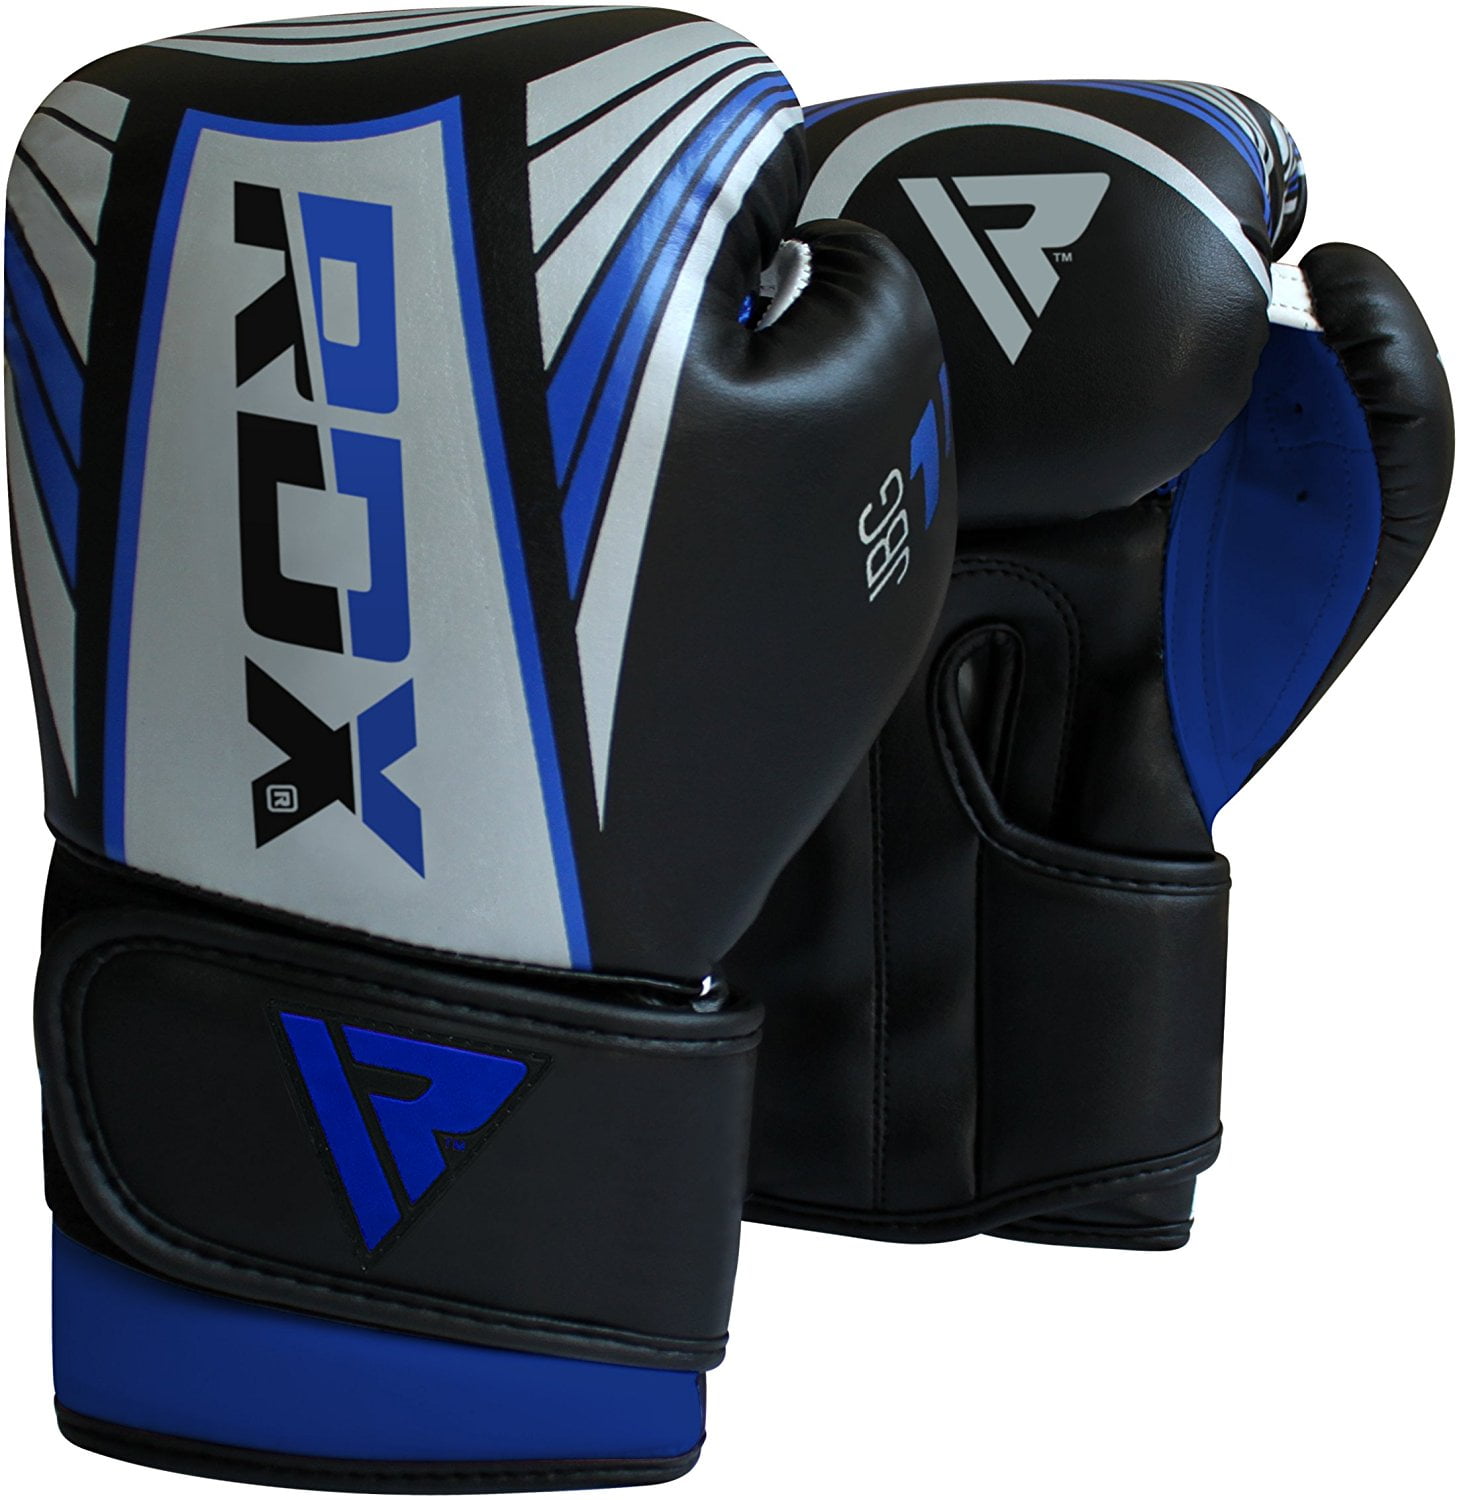 RDX Kids Boxing Gloves Punch Bag Speed Ball Focus Pads Punching Workout Maya Hide Leather Ventilated Palm Muay Thai Sparring MMA Kickboxing Fighting 6oz 4oz Junior Training Mitts Youth Games Fun 